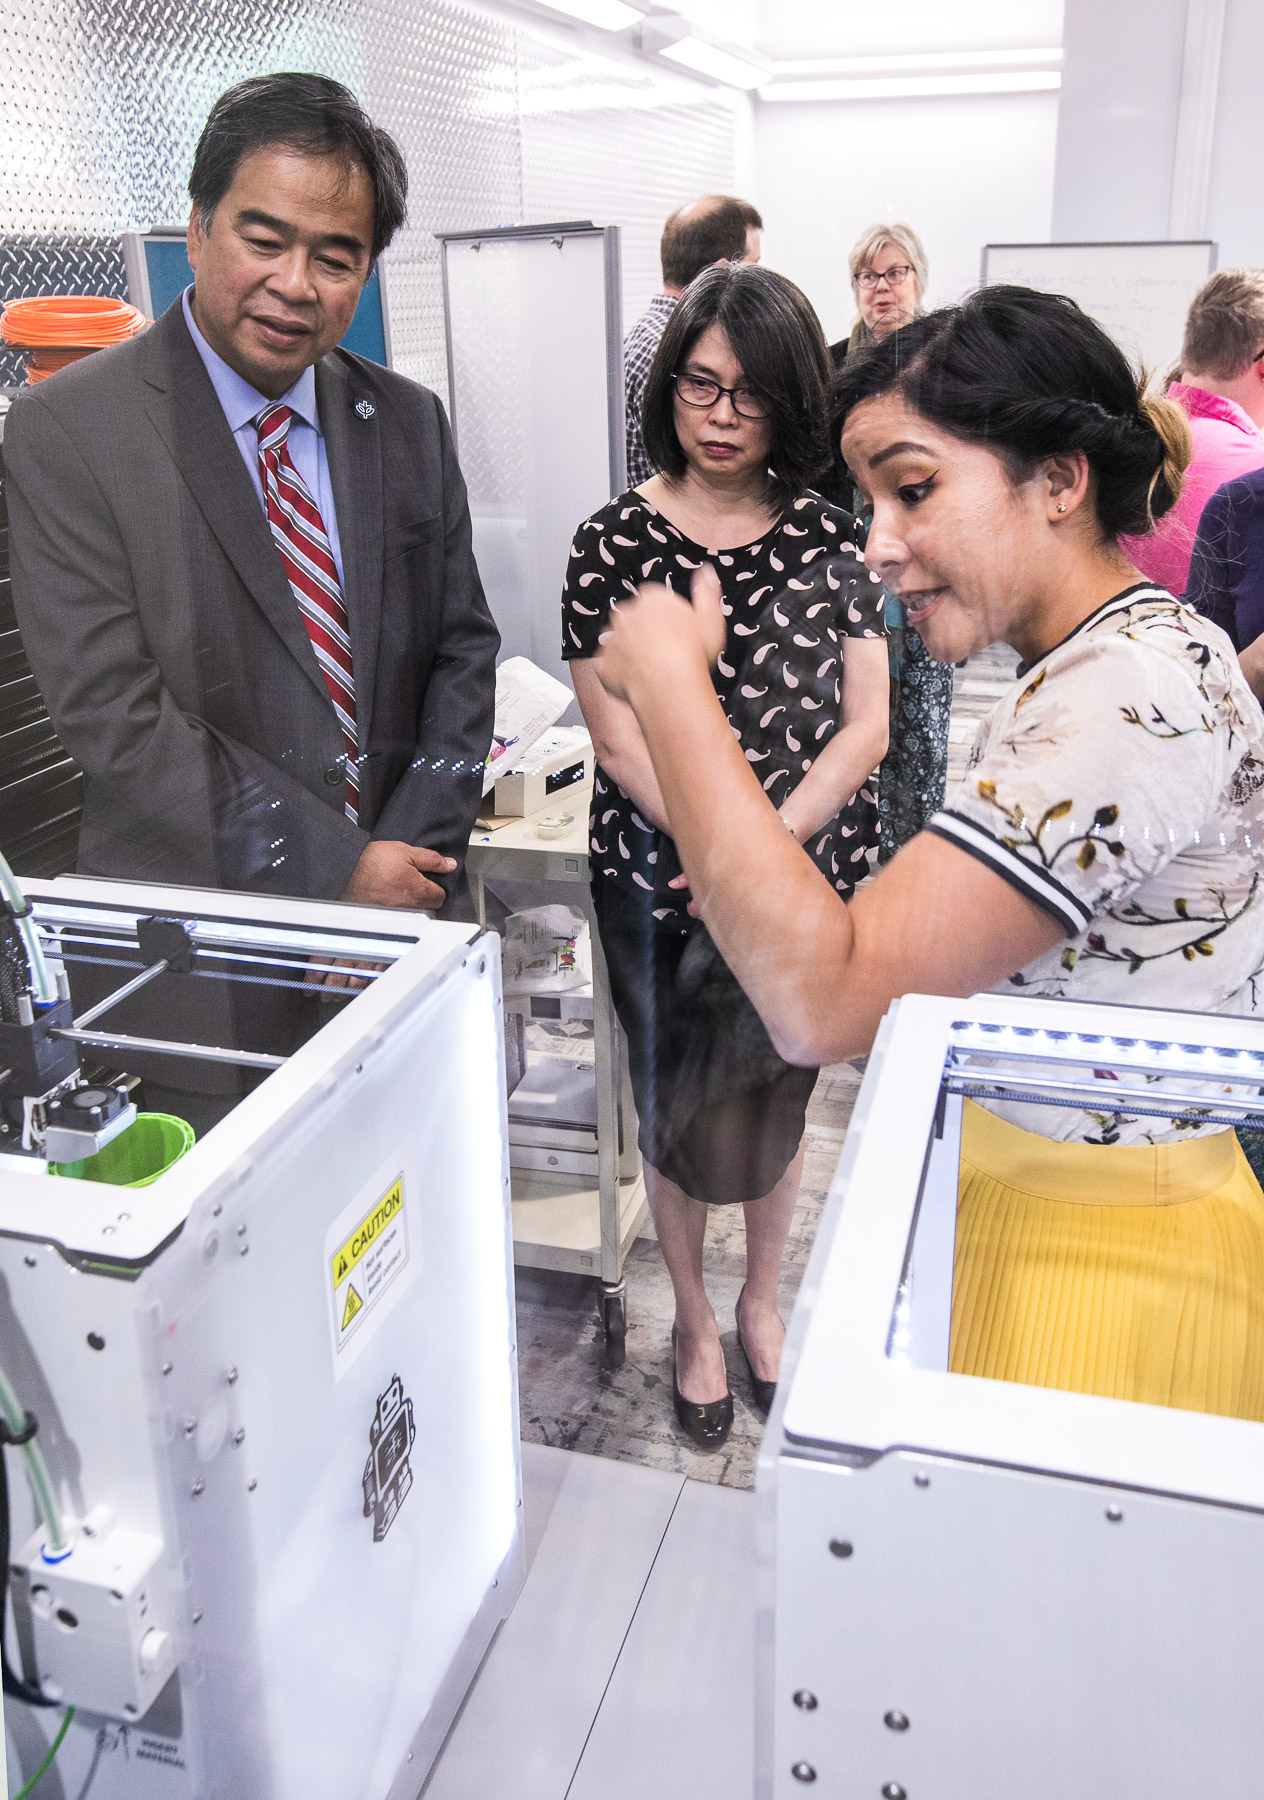 Janice Scurio, right, shows off one of the 3D printers available in the new maker space to DePaul University President A. Gabriel Esteban, Ph.D., and his wife, Josephine, as they tour the newly workspaces in the Richardson Library. (DePaul University/Jamie Moncrief)